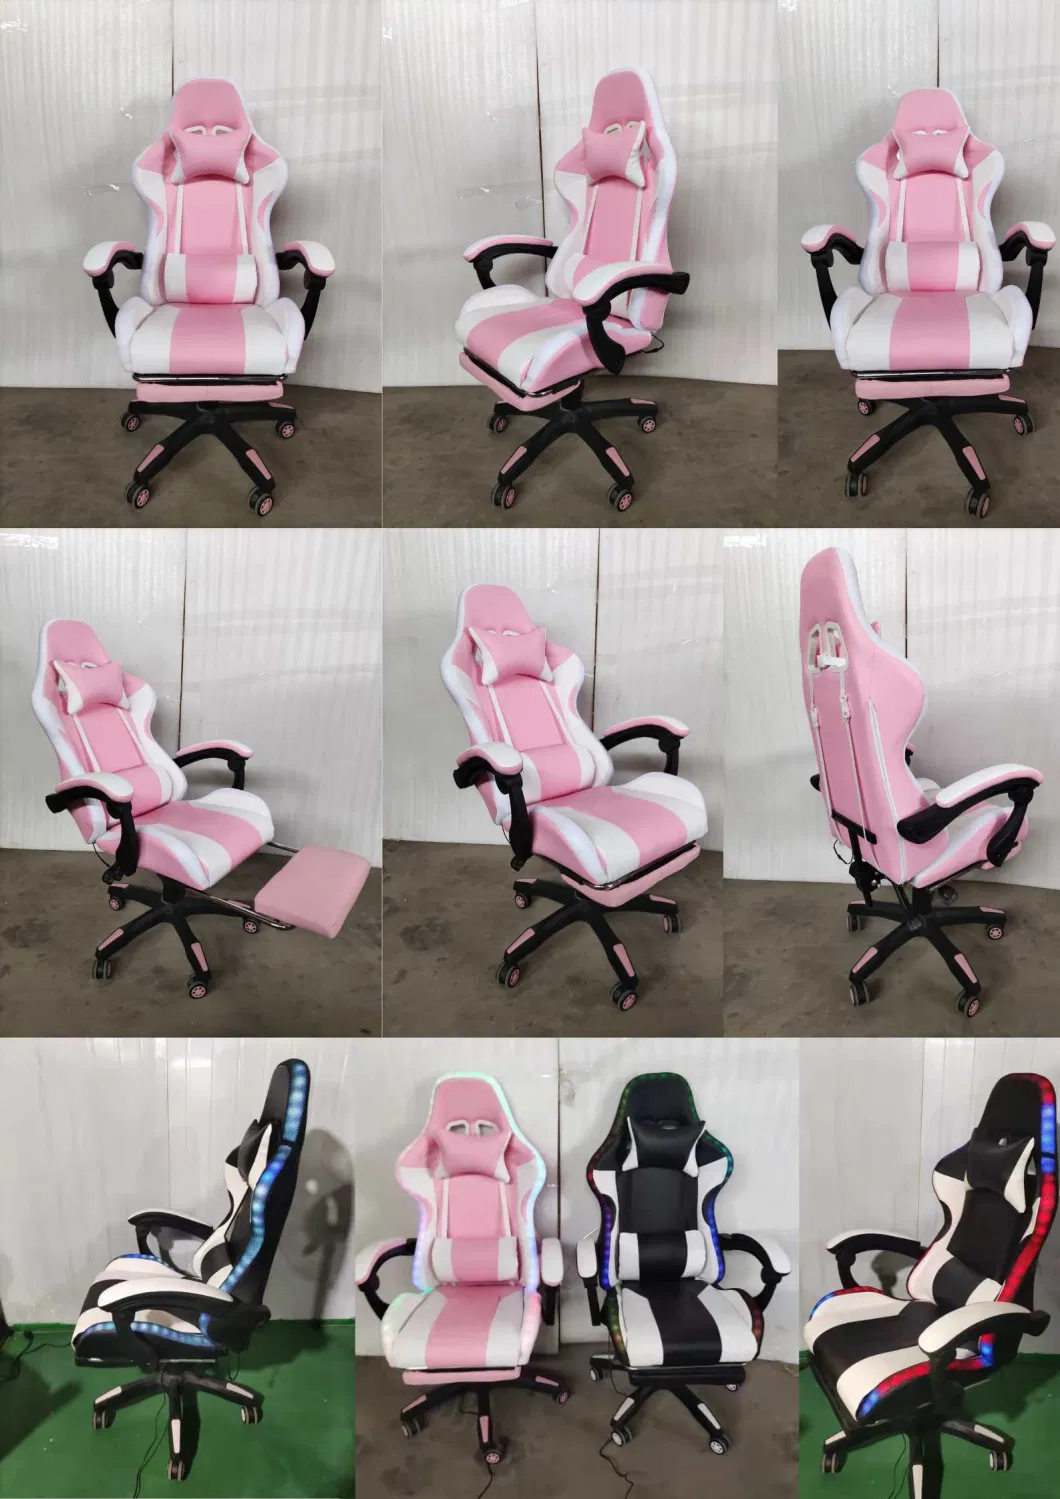 Best Price Fashion Modern Gaming Chair with LED Light Swiveling Dropshipping Professional Gaming Chair RGB